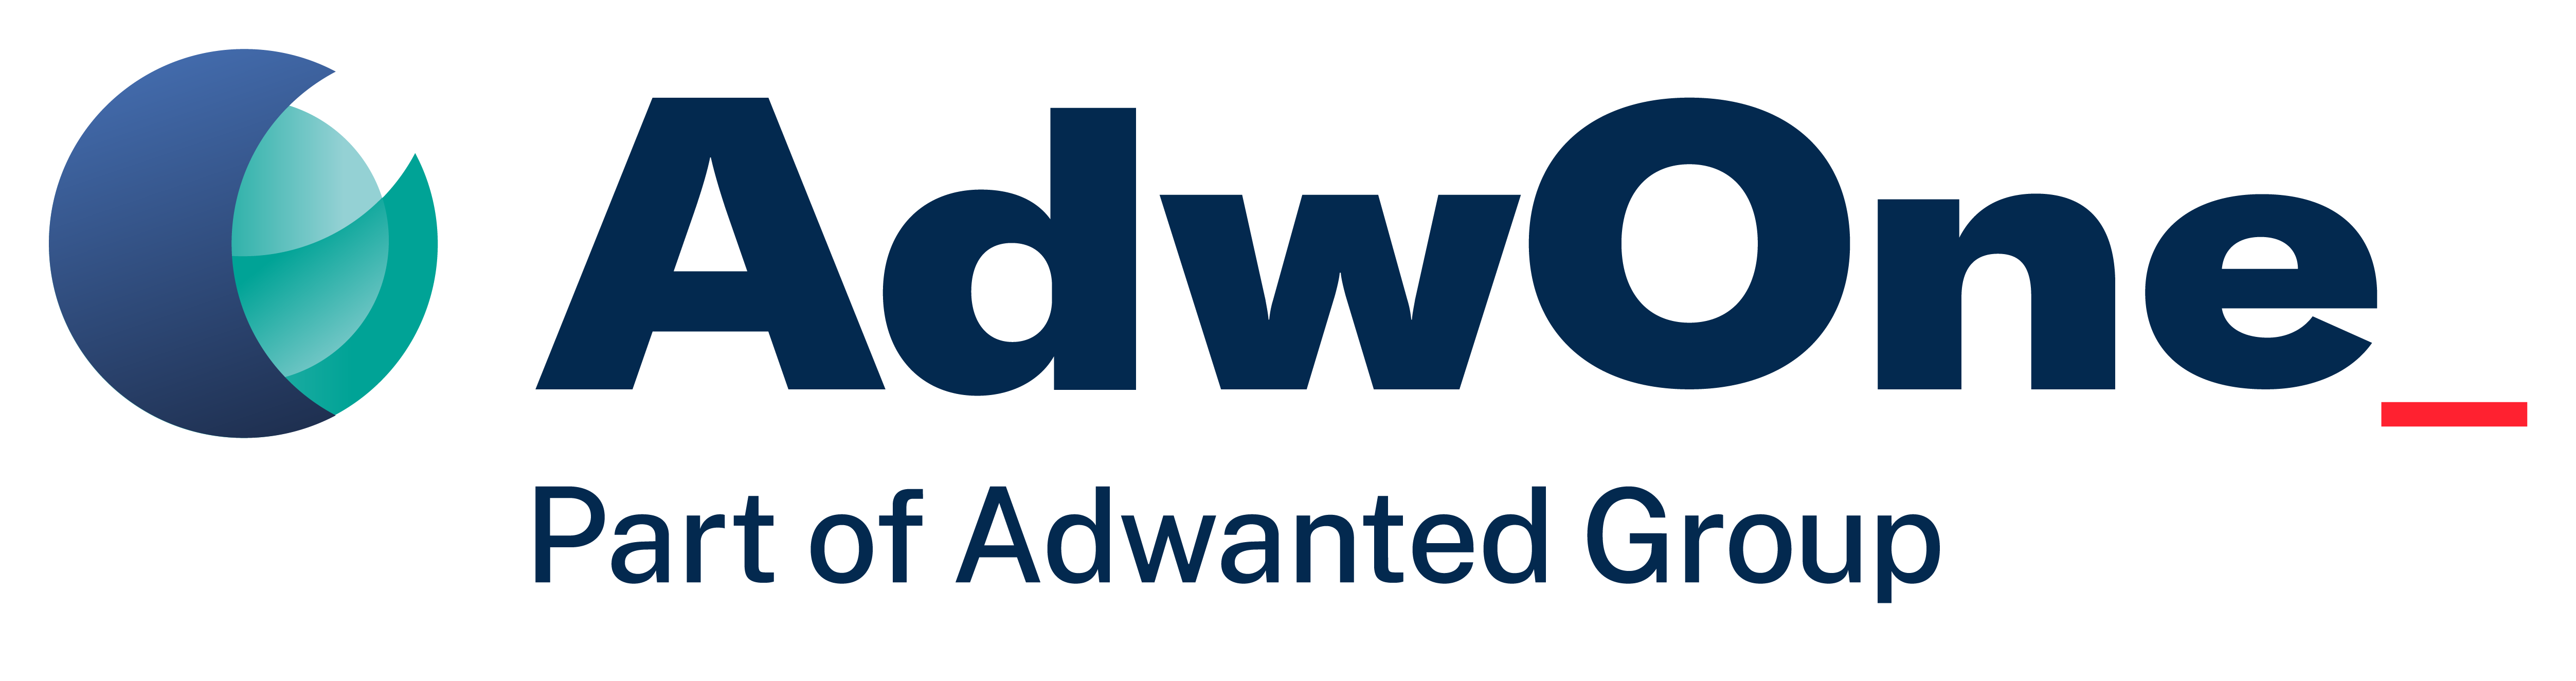 AdwOne logo. Campaign management tool from Adwanted Group.